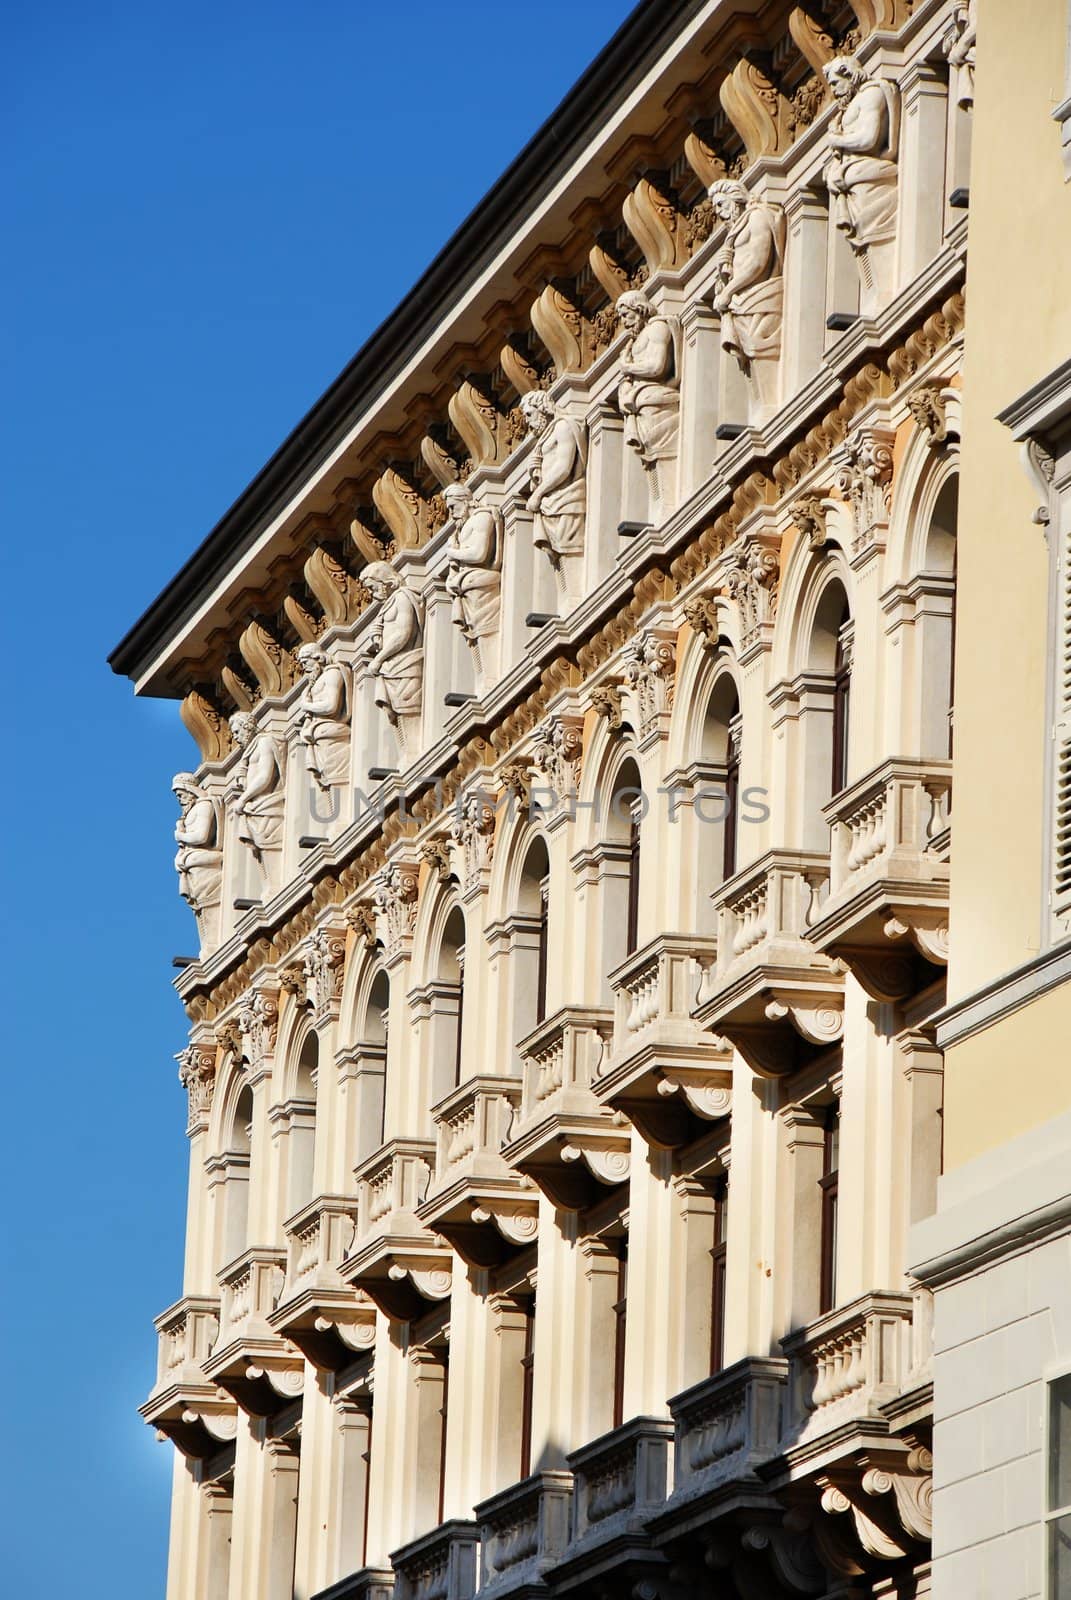 Architectural details of building in Trieste, Italy, on Piazza Unit